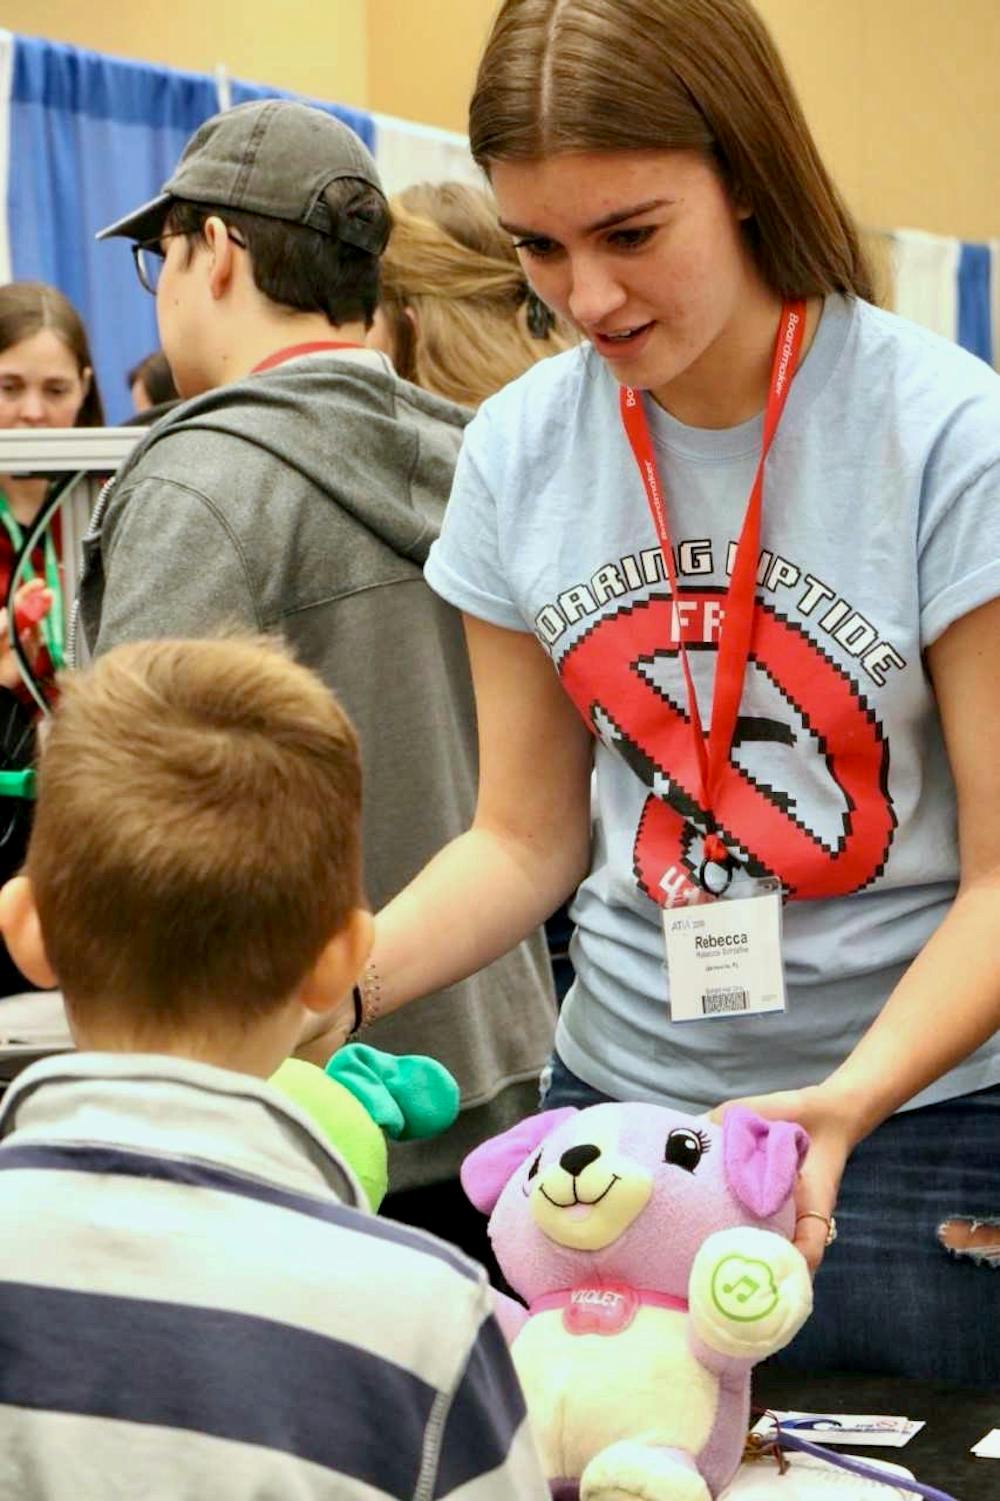 <p dir="ltr"><span>A student from P.K. Yonge Developmental Research School’s First Robotics Club, 12th-grader Rebecca Schlafke, demonstrates how to use the club’s adapted creations to a child at the Assistive Technology Industry Association Maker's Day on Saturday.</span></p><p><span> </span></p>